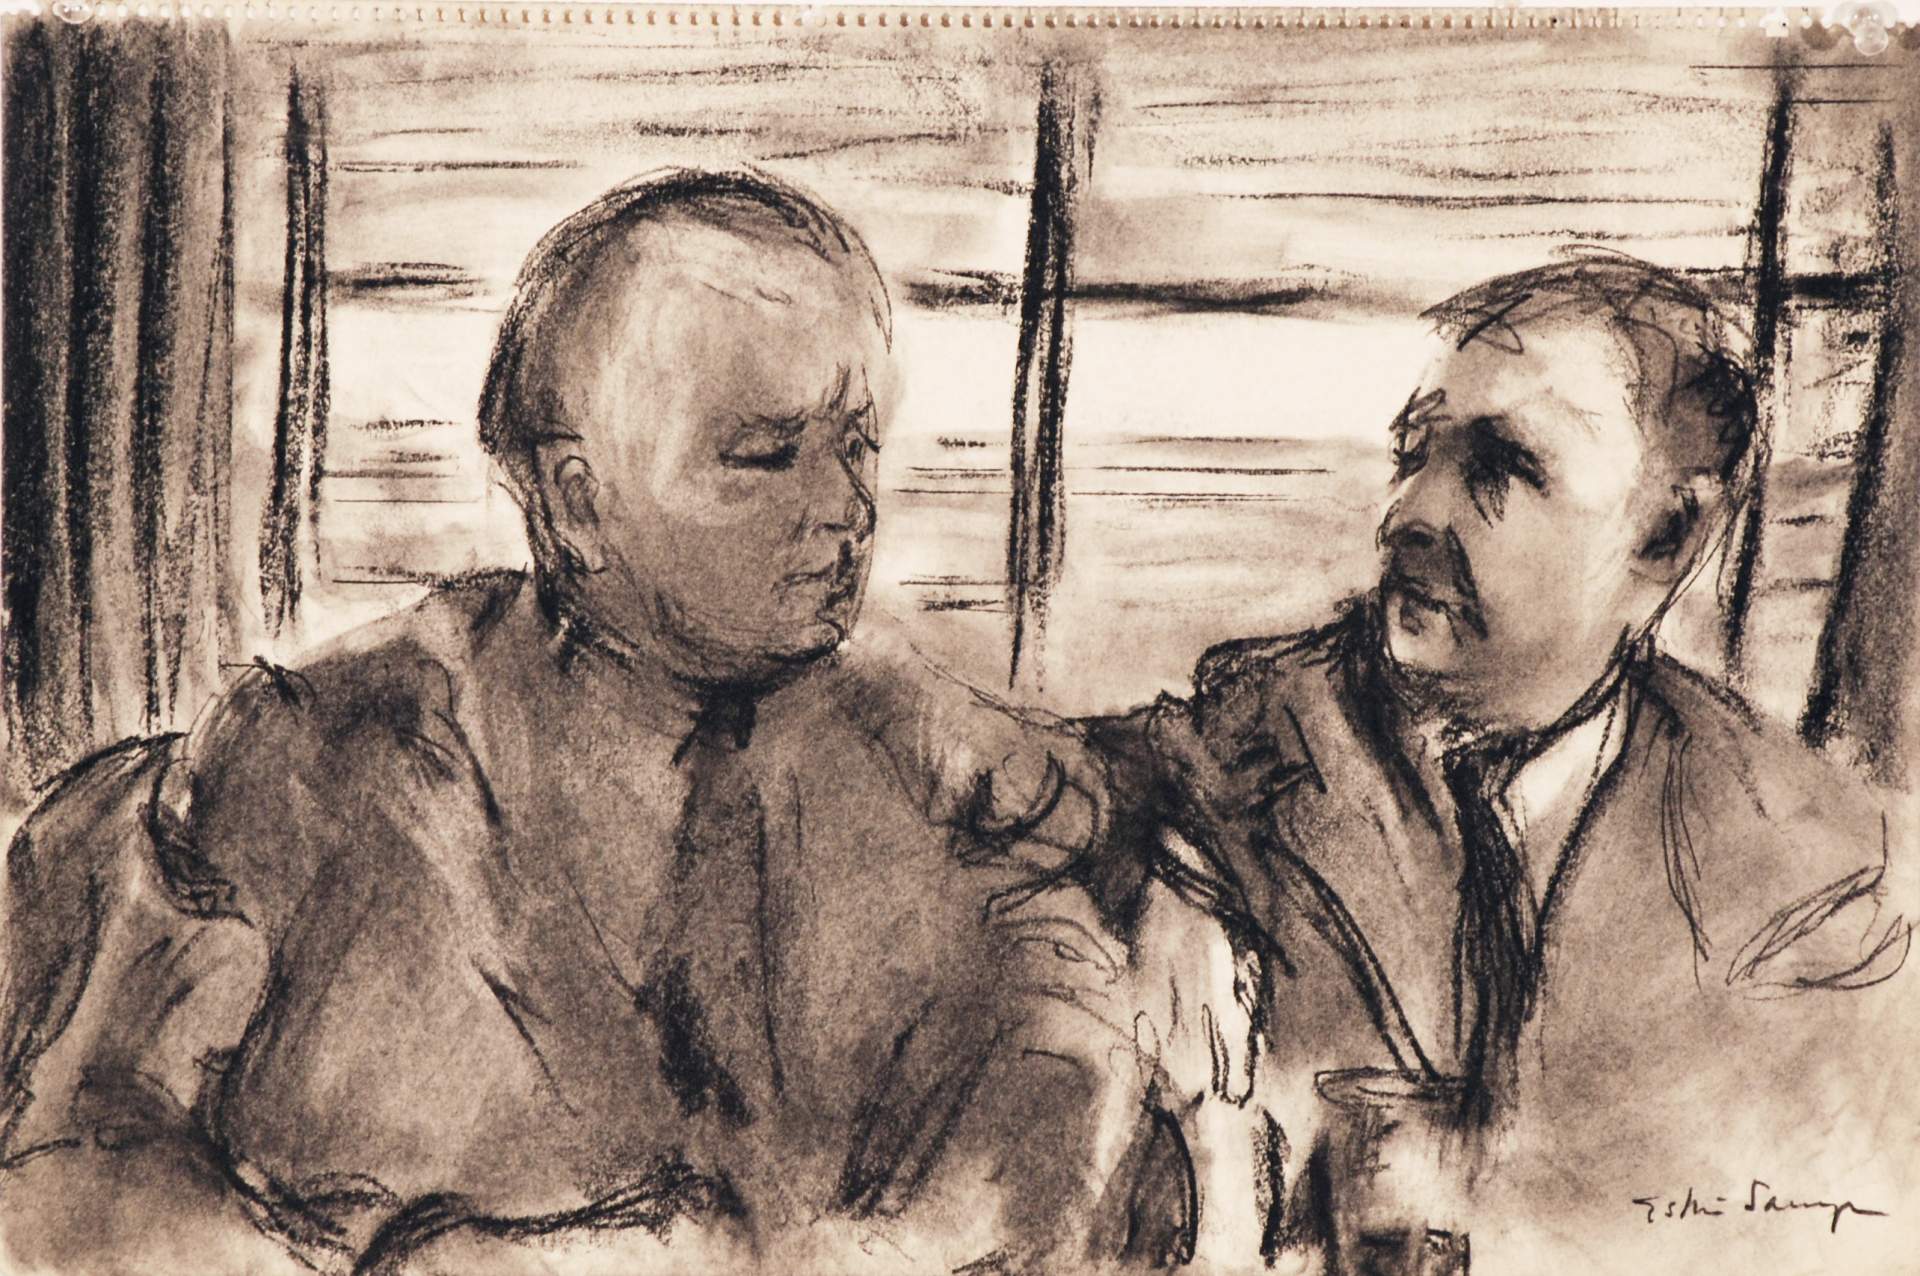 Untitled [two male figures]